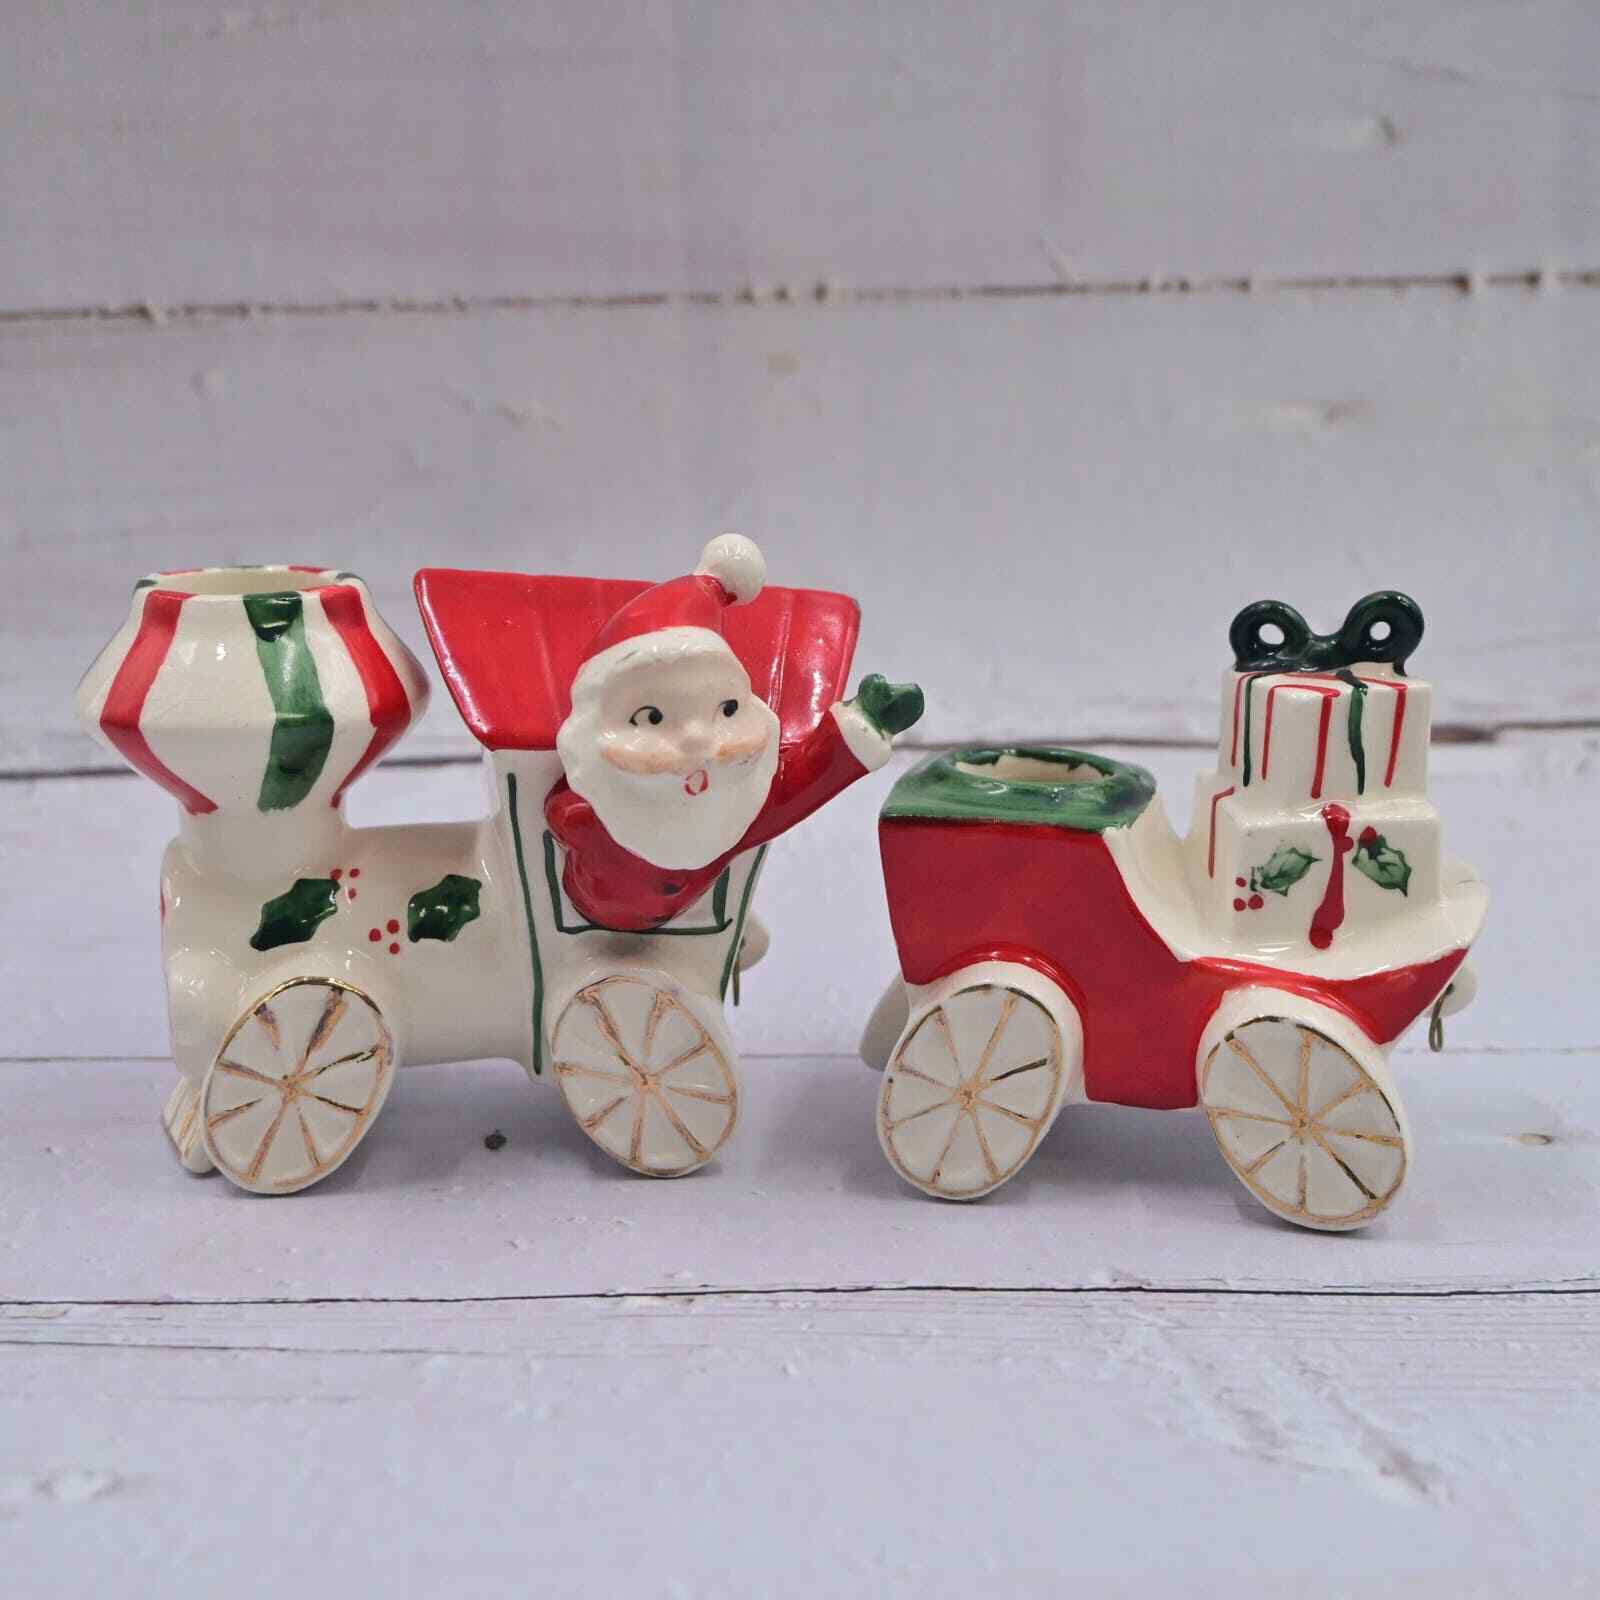 Vintage Napco Christmas Santa Candle Holder With Caboose Figures 